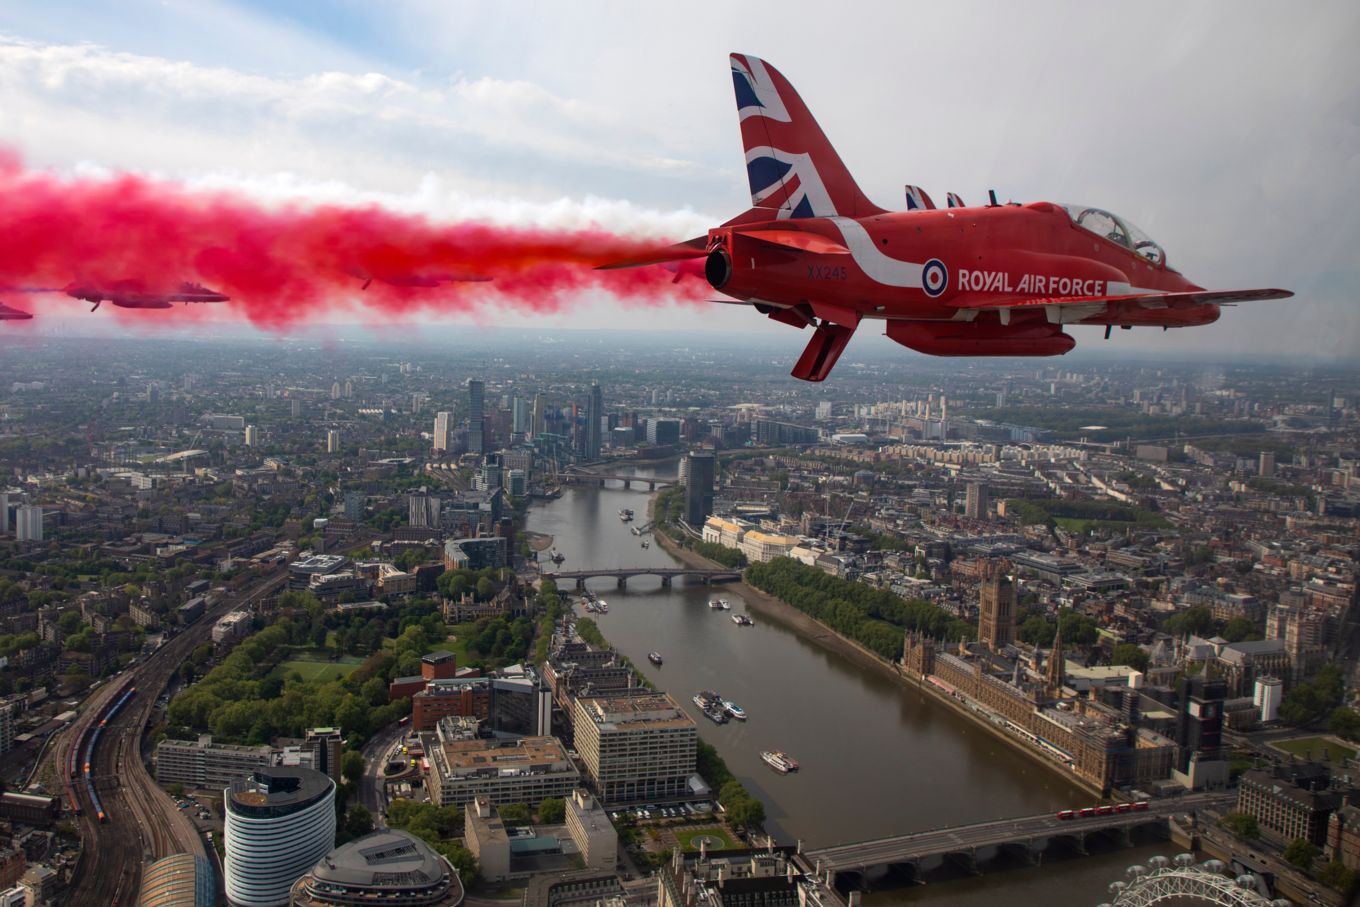 The Red Arrows over London to mark VE Day 75. Image by SAC Hannah Smoker.